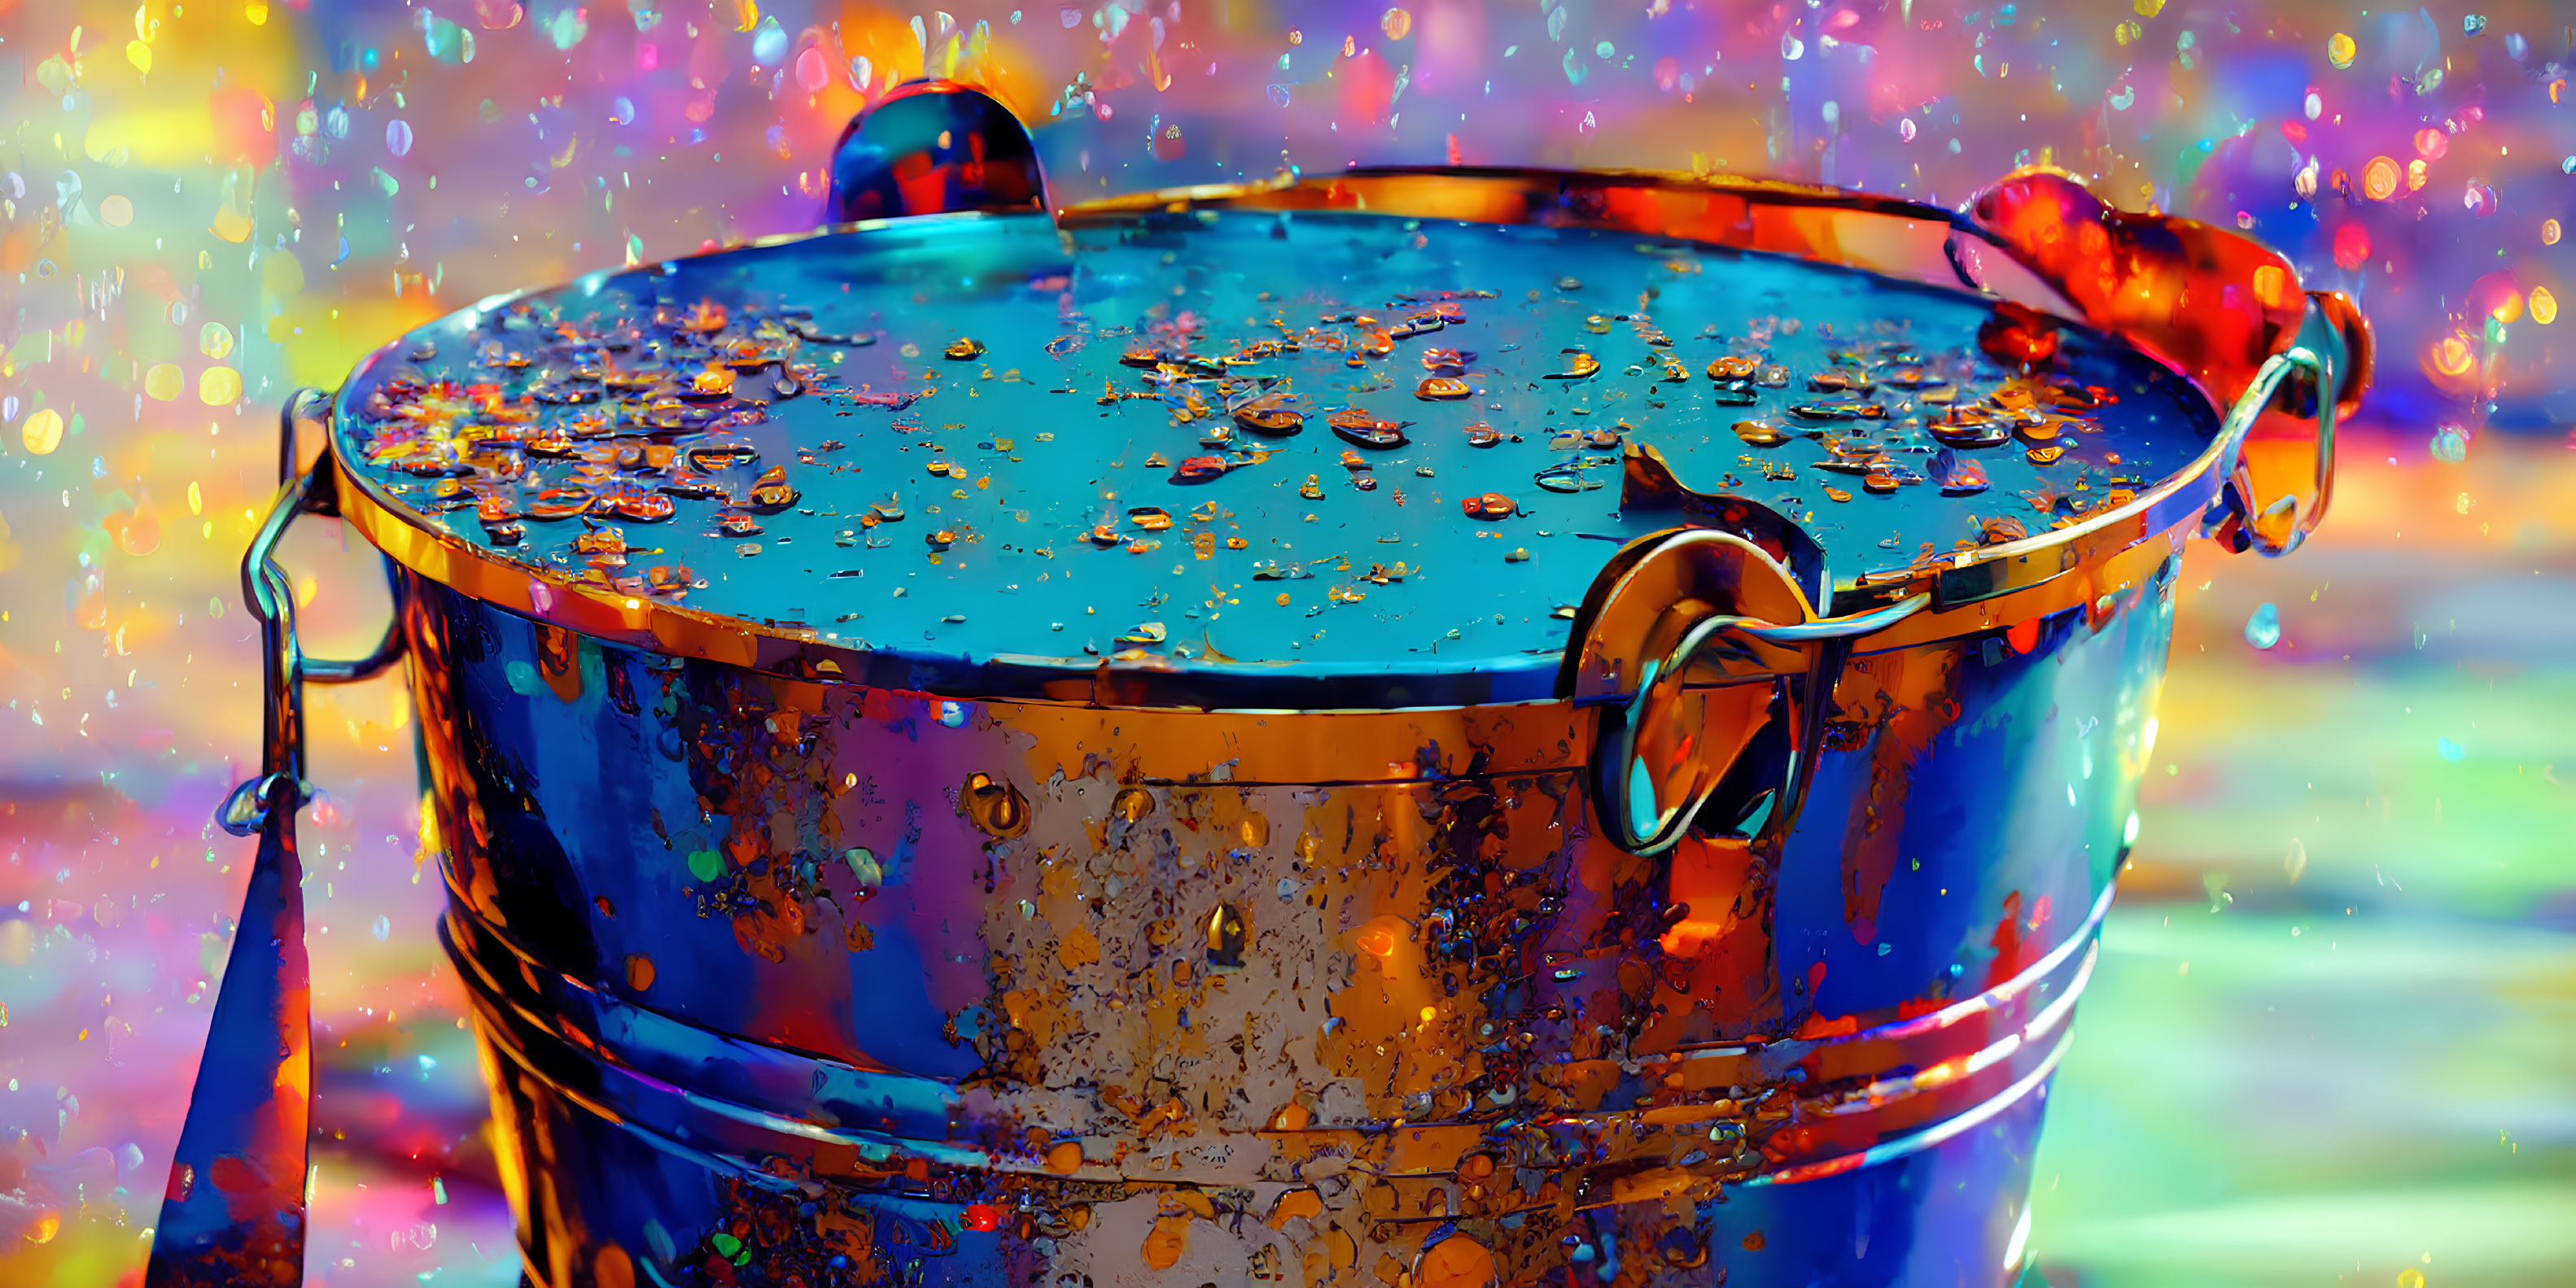 Colorful Backdrop with Water Droplets on Shiny Blue Bucket